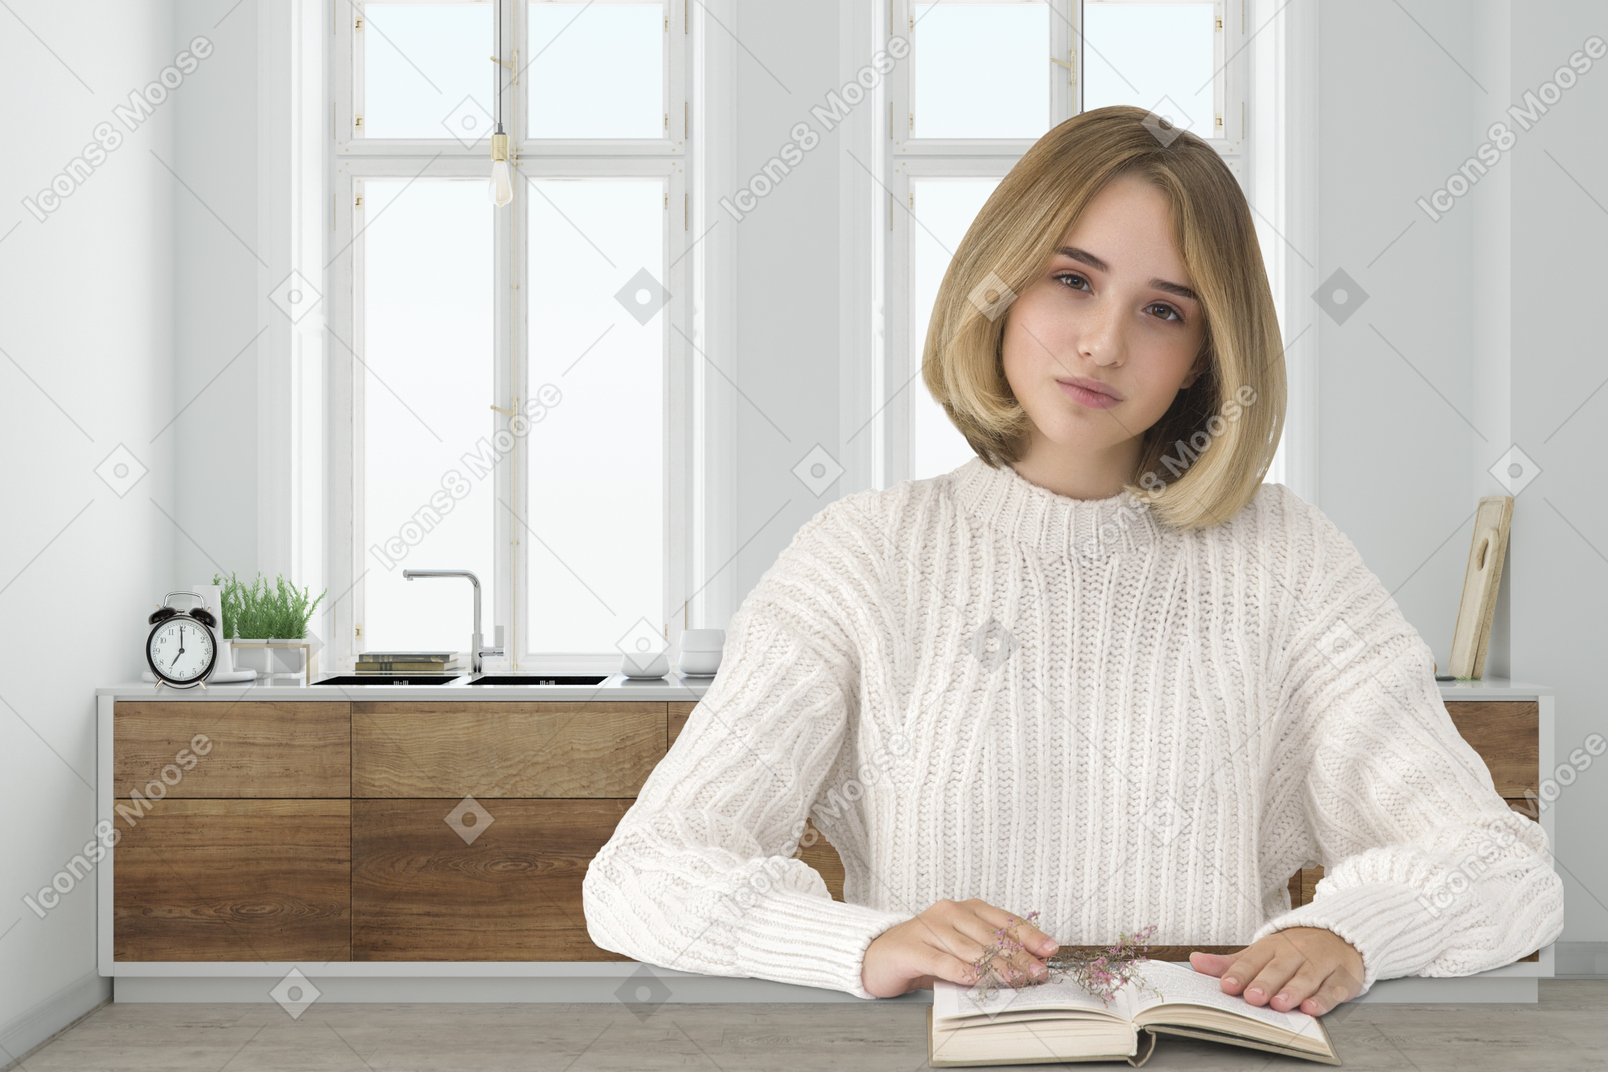 A woman sitting at a table reading a book